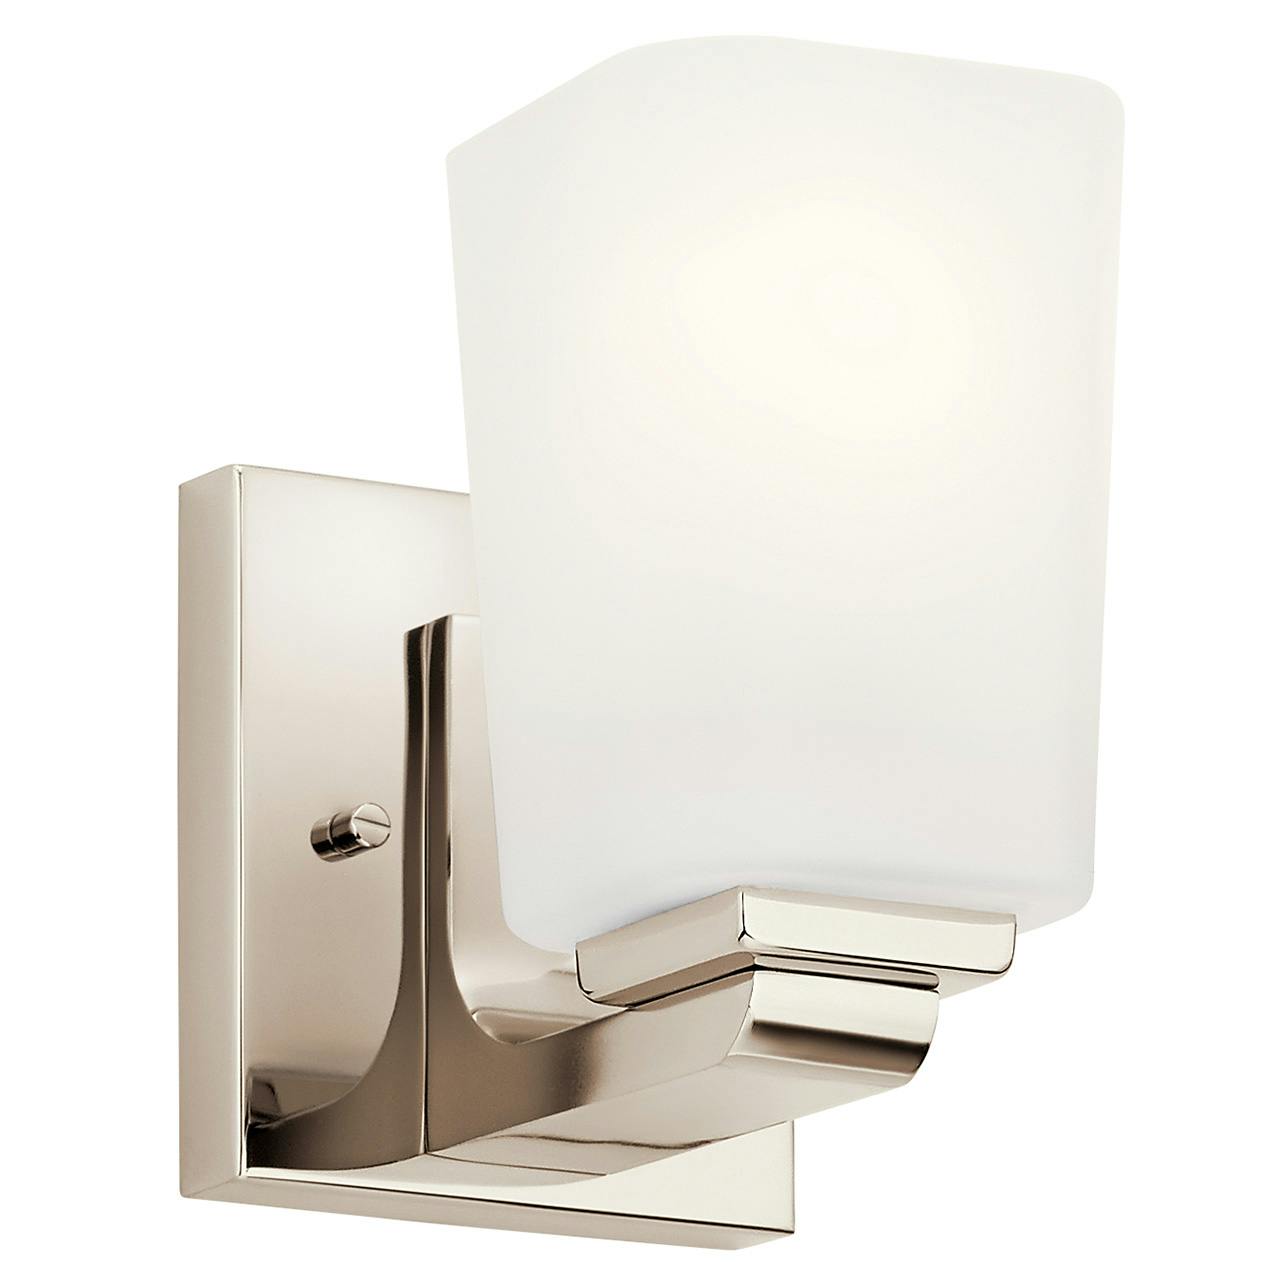 Roehm 1 Light Wall Sconce Polished Nickel on a white background